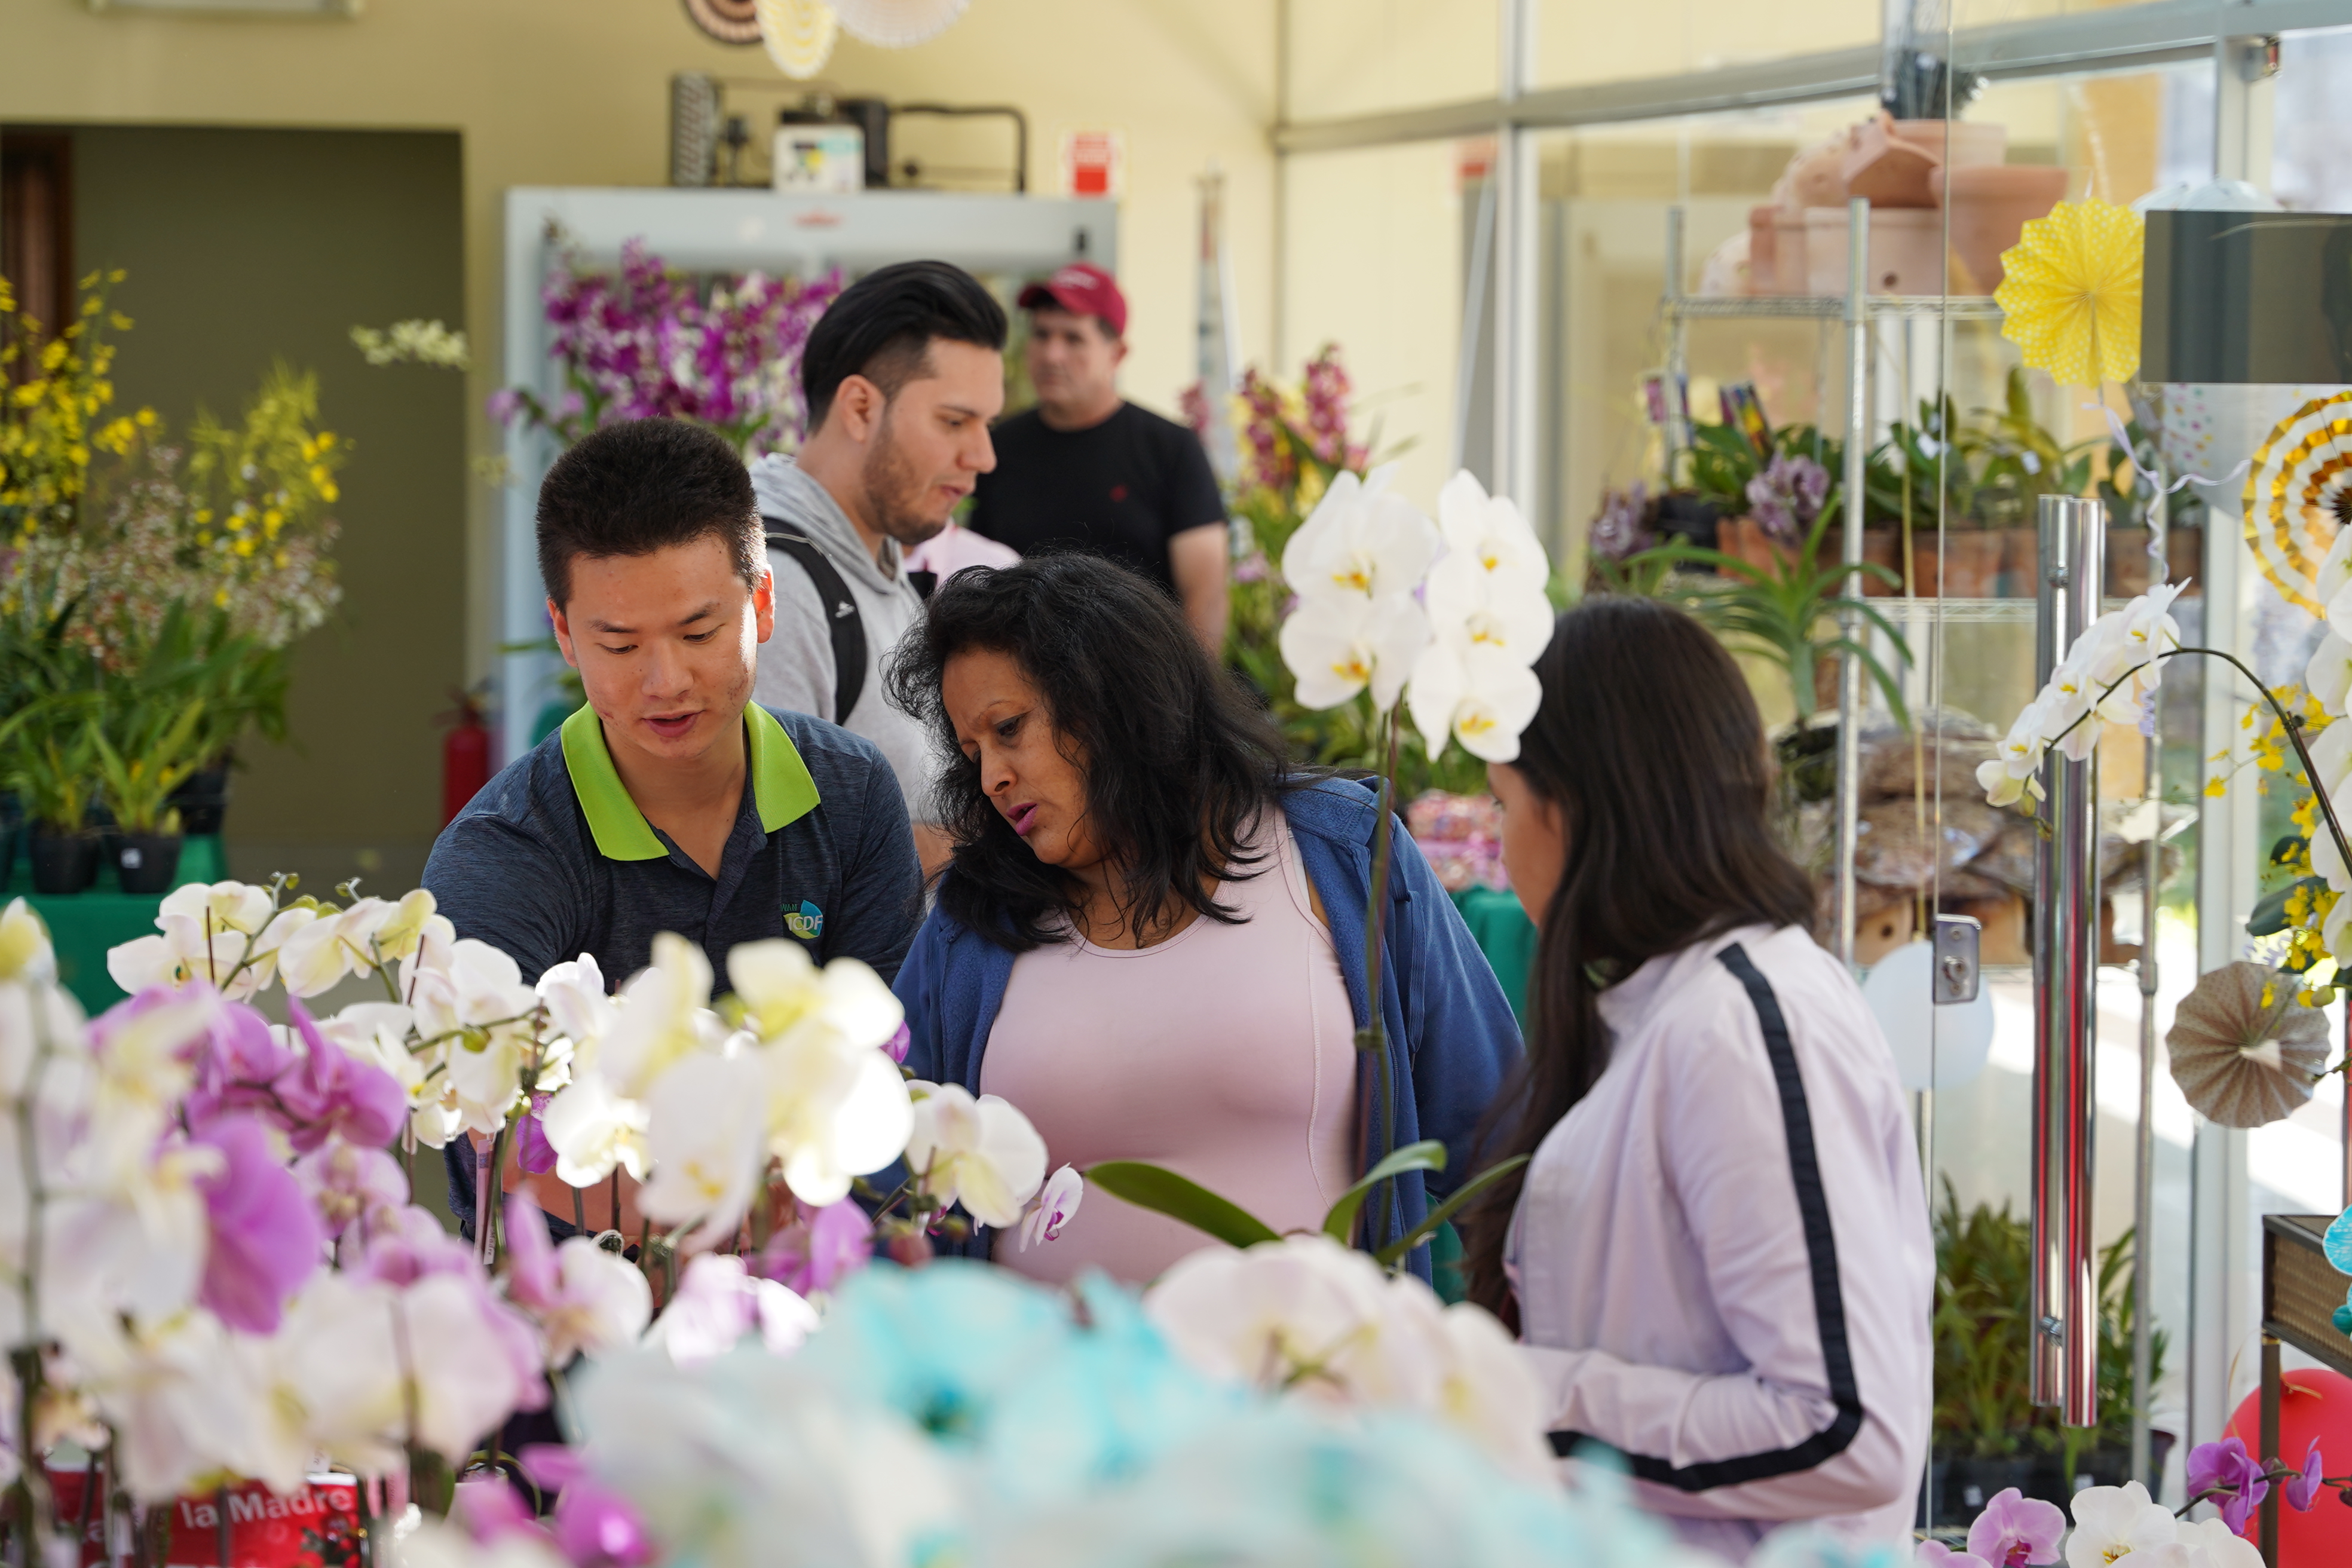 Taiwan’s Phalaenopsis Orchids: An Increasingly Popular Mother’s Day Gift in Paraguay